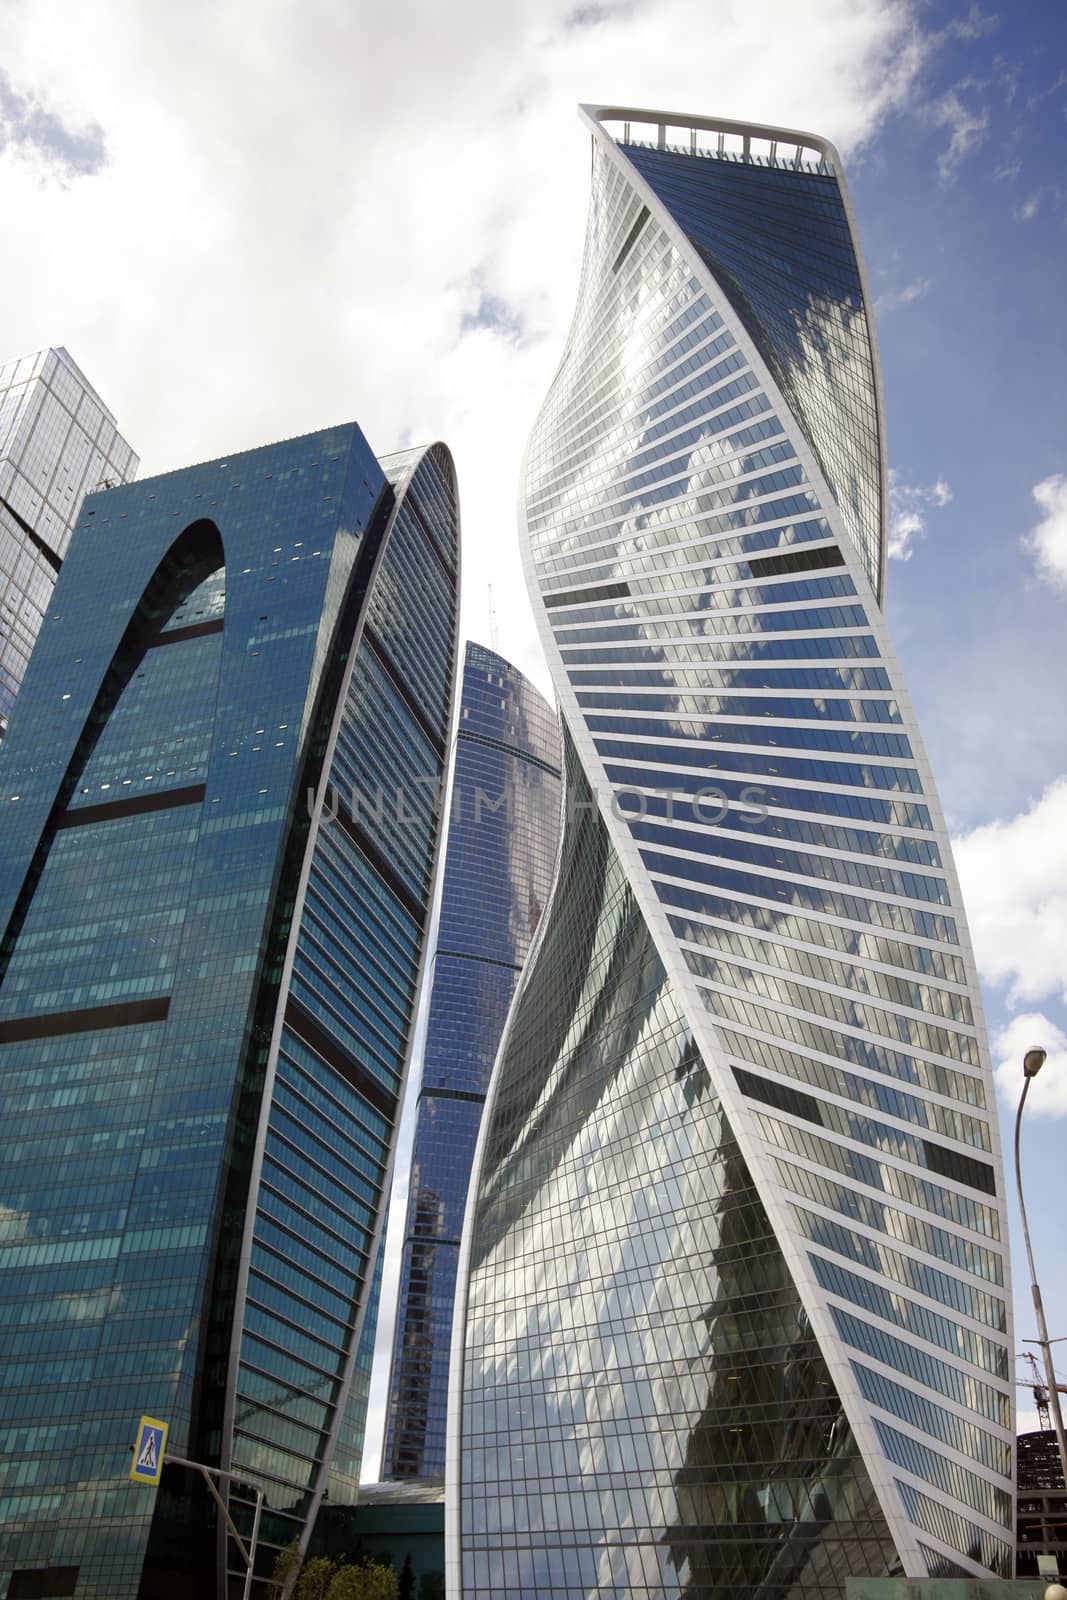 View of skyscrapers Moscow International Business Center.